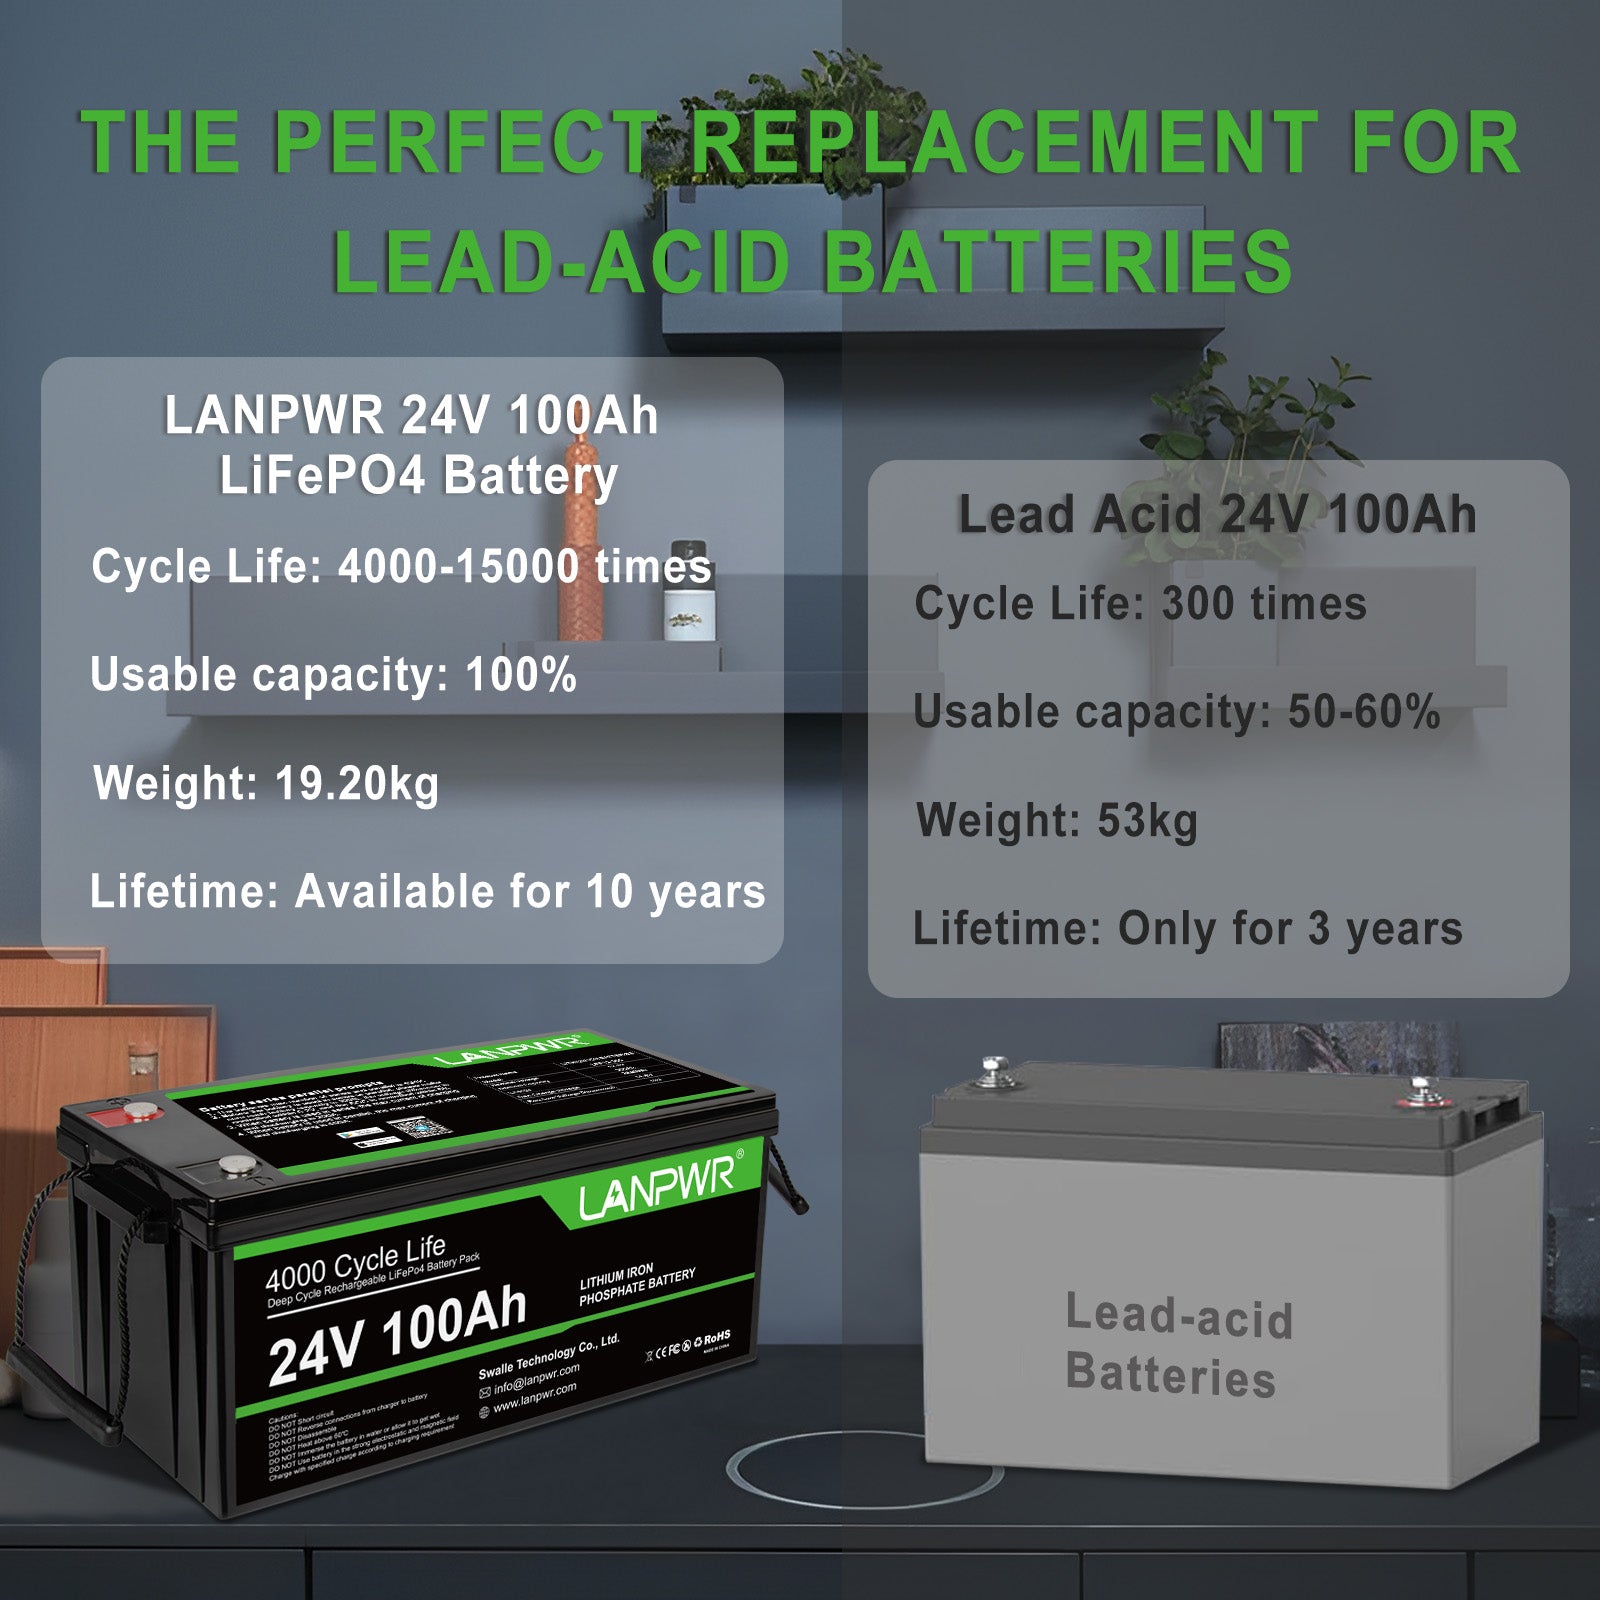 LANPWR 24V 100Ah LiFePO4 Battery with Bluetooth 5.0, Maximum Load Power 2560W, 2560Wh Energy